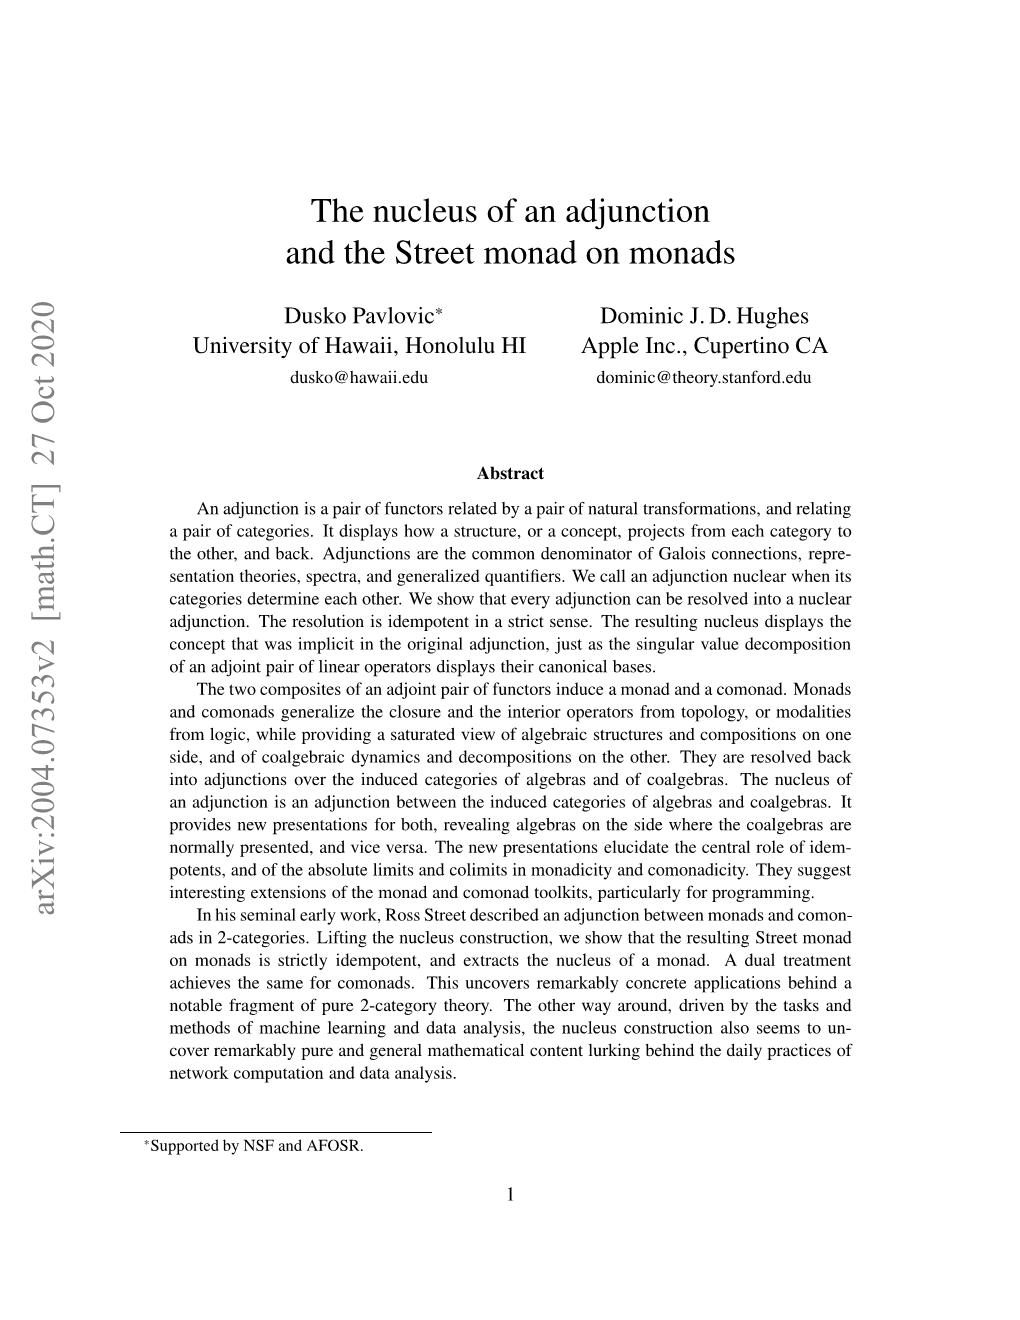 [Math.CT] 27 Oct 2020 the Nucleus of an Adjunction and the Street Monad